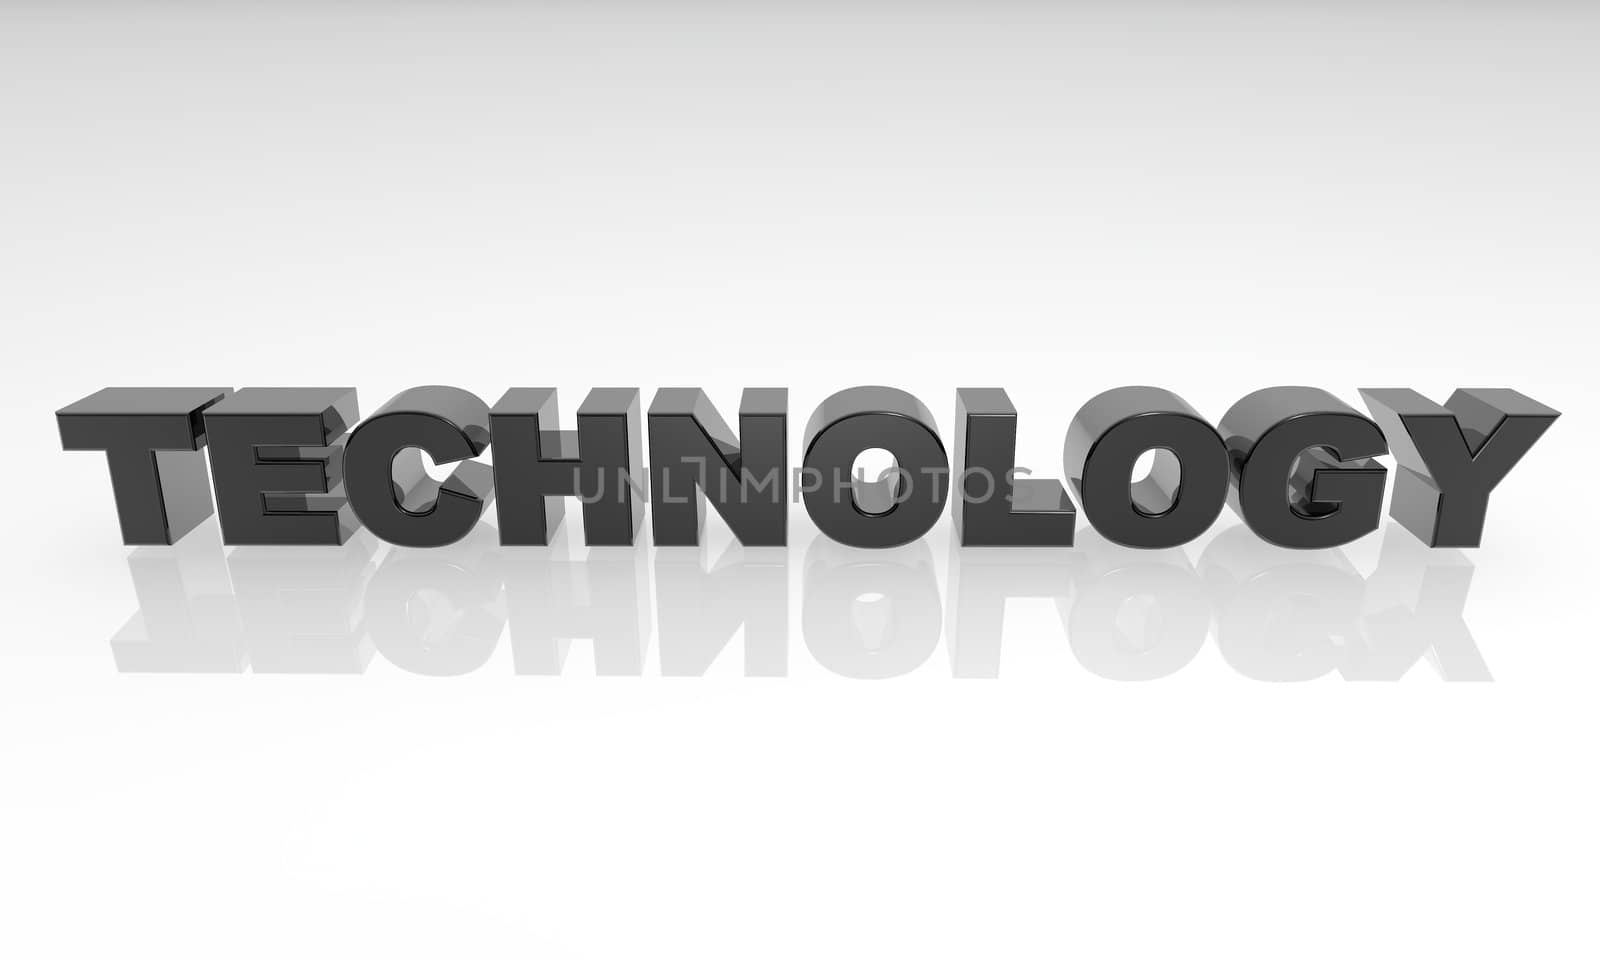 Buzzword technology 3d Text by jeremywhat